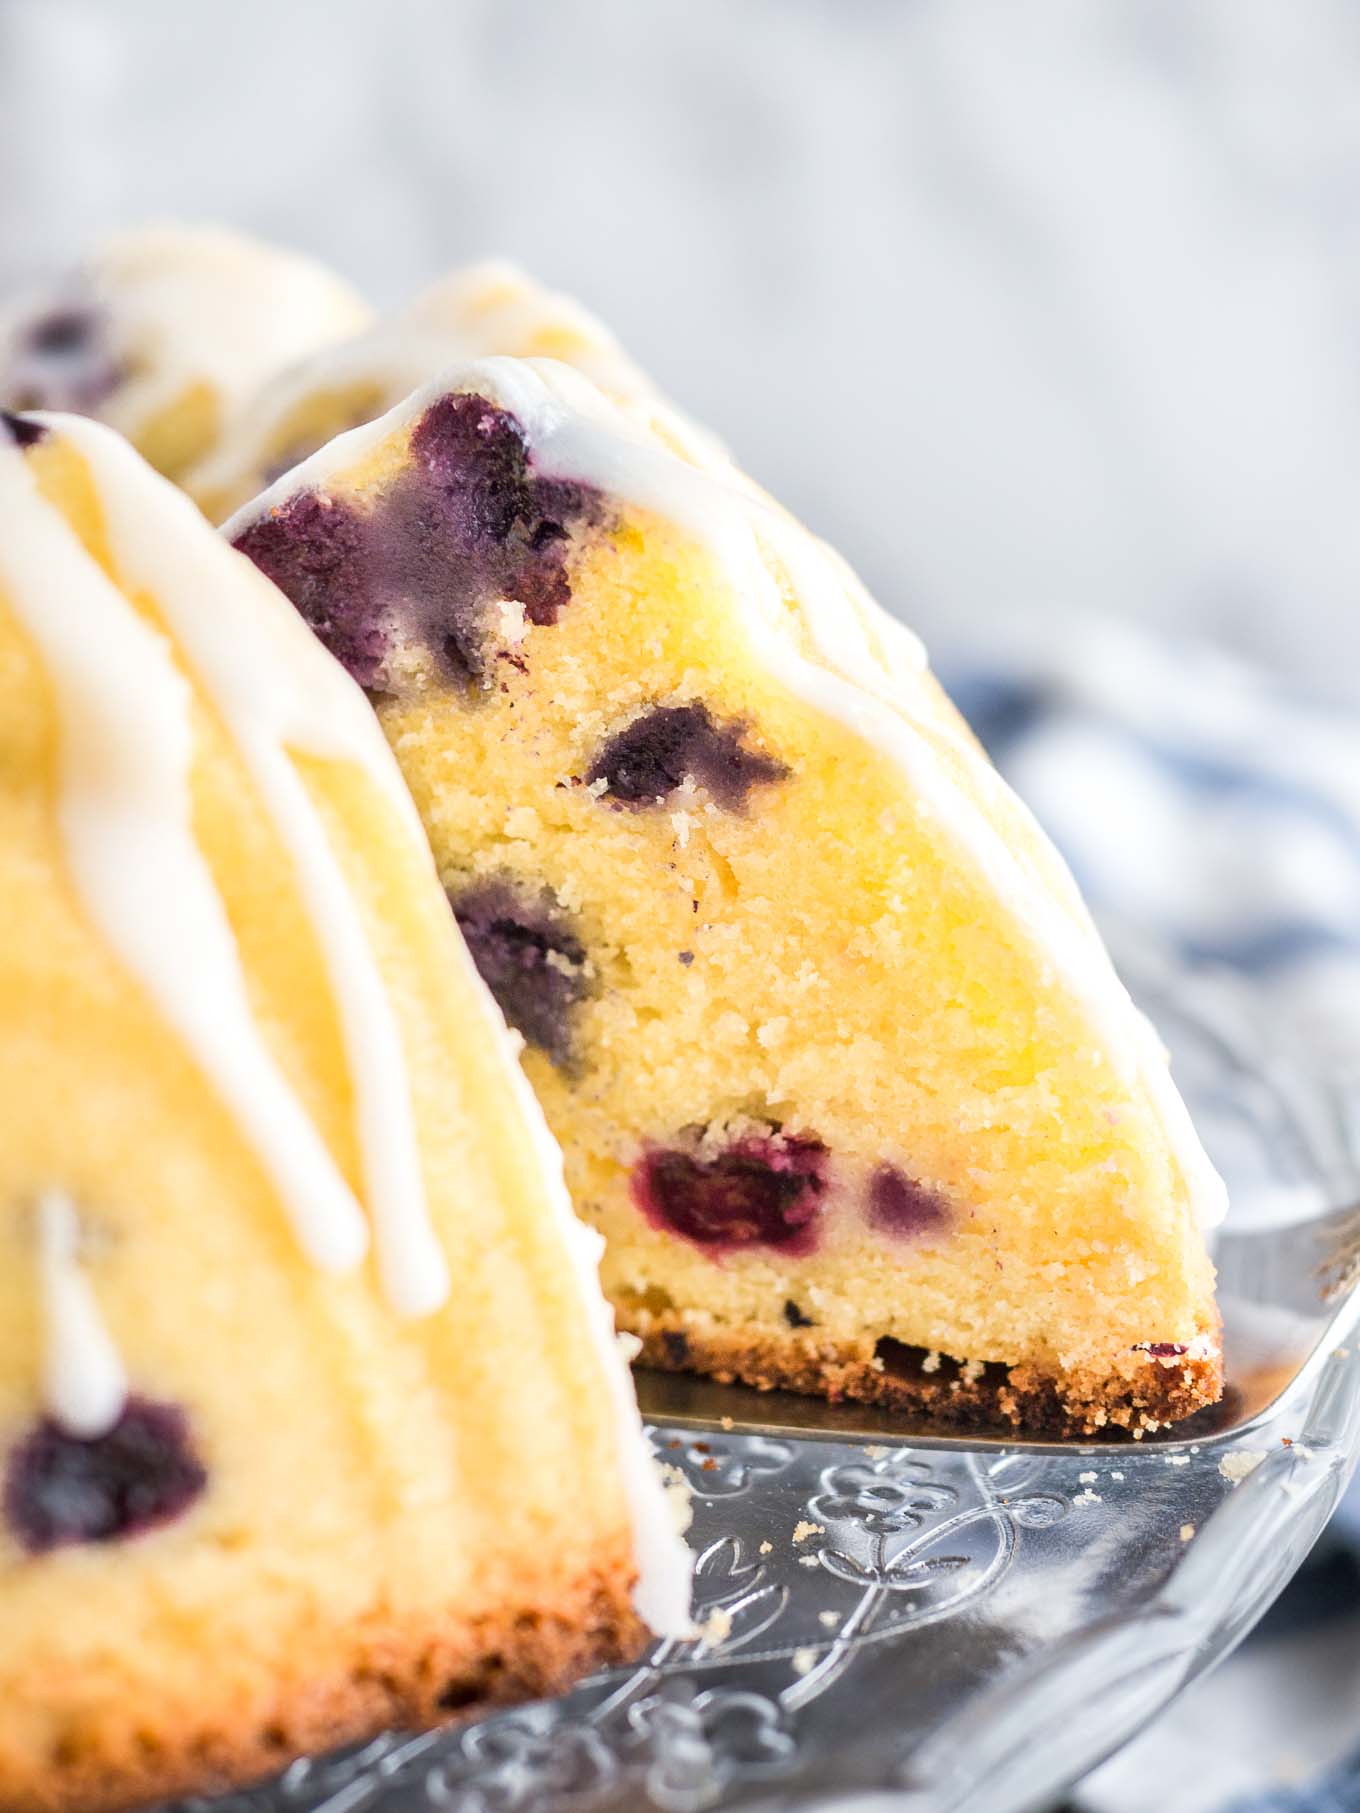 Close-up of a lemon blueberry bundt cake on a glass serving platter with lemon glaze. A slice has been removed and a cake server is wedged under the cake. There\'s a white and blue dishtowel in the background.